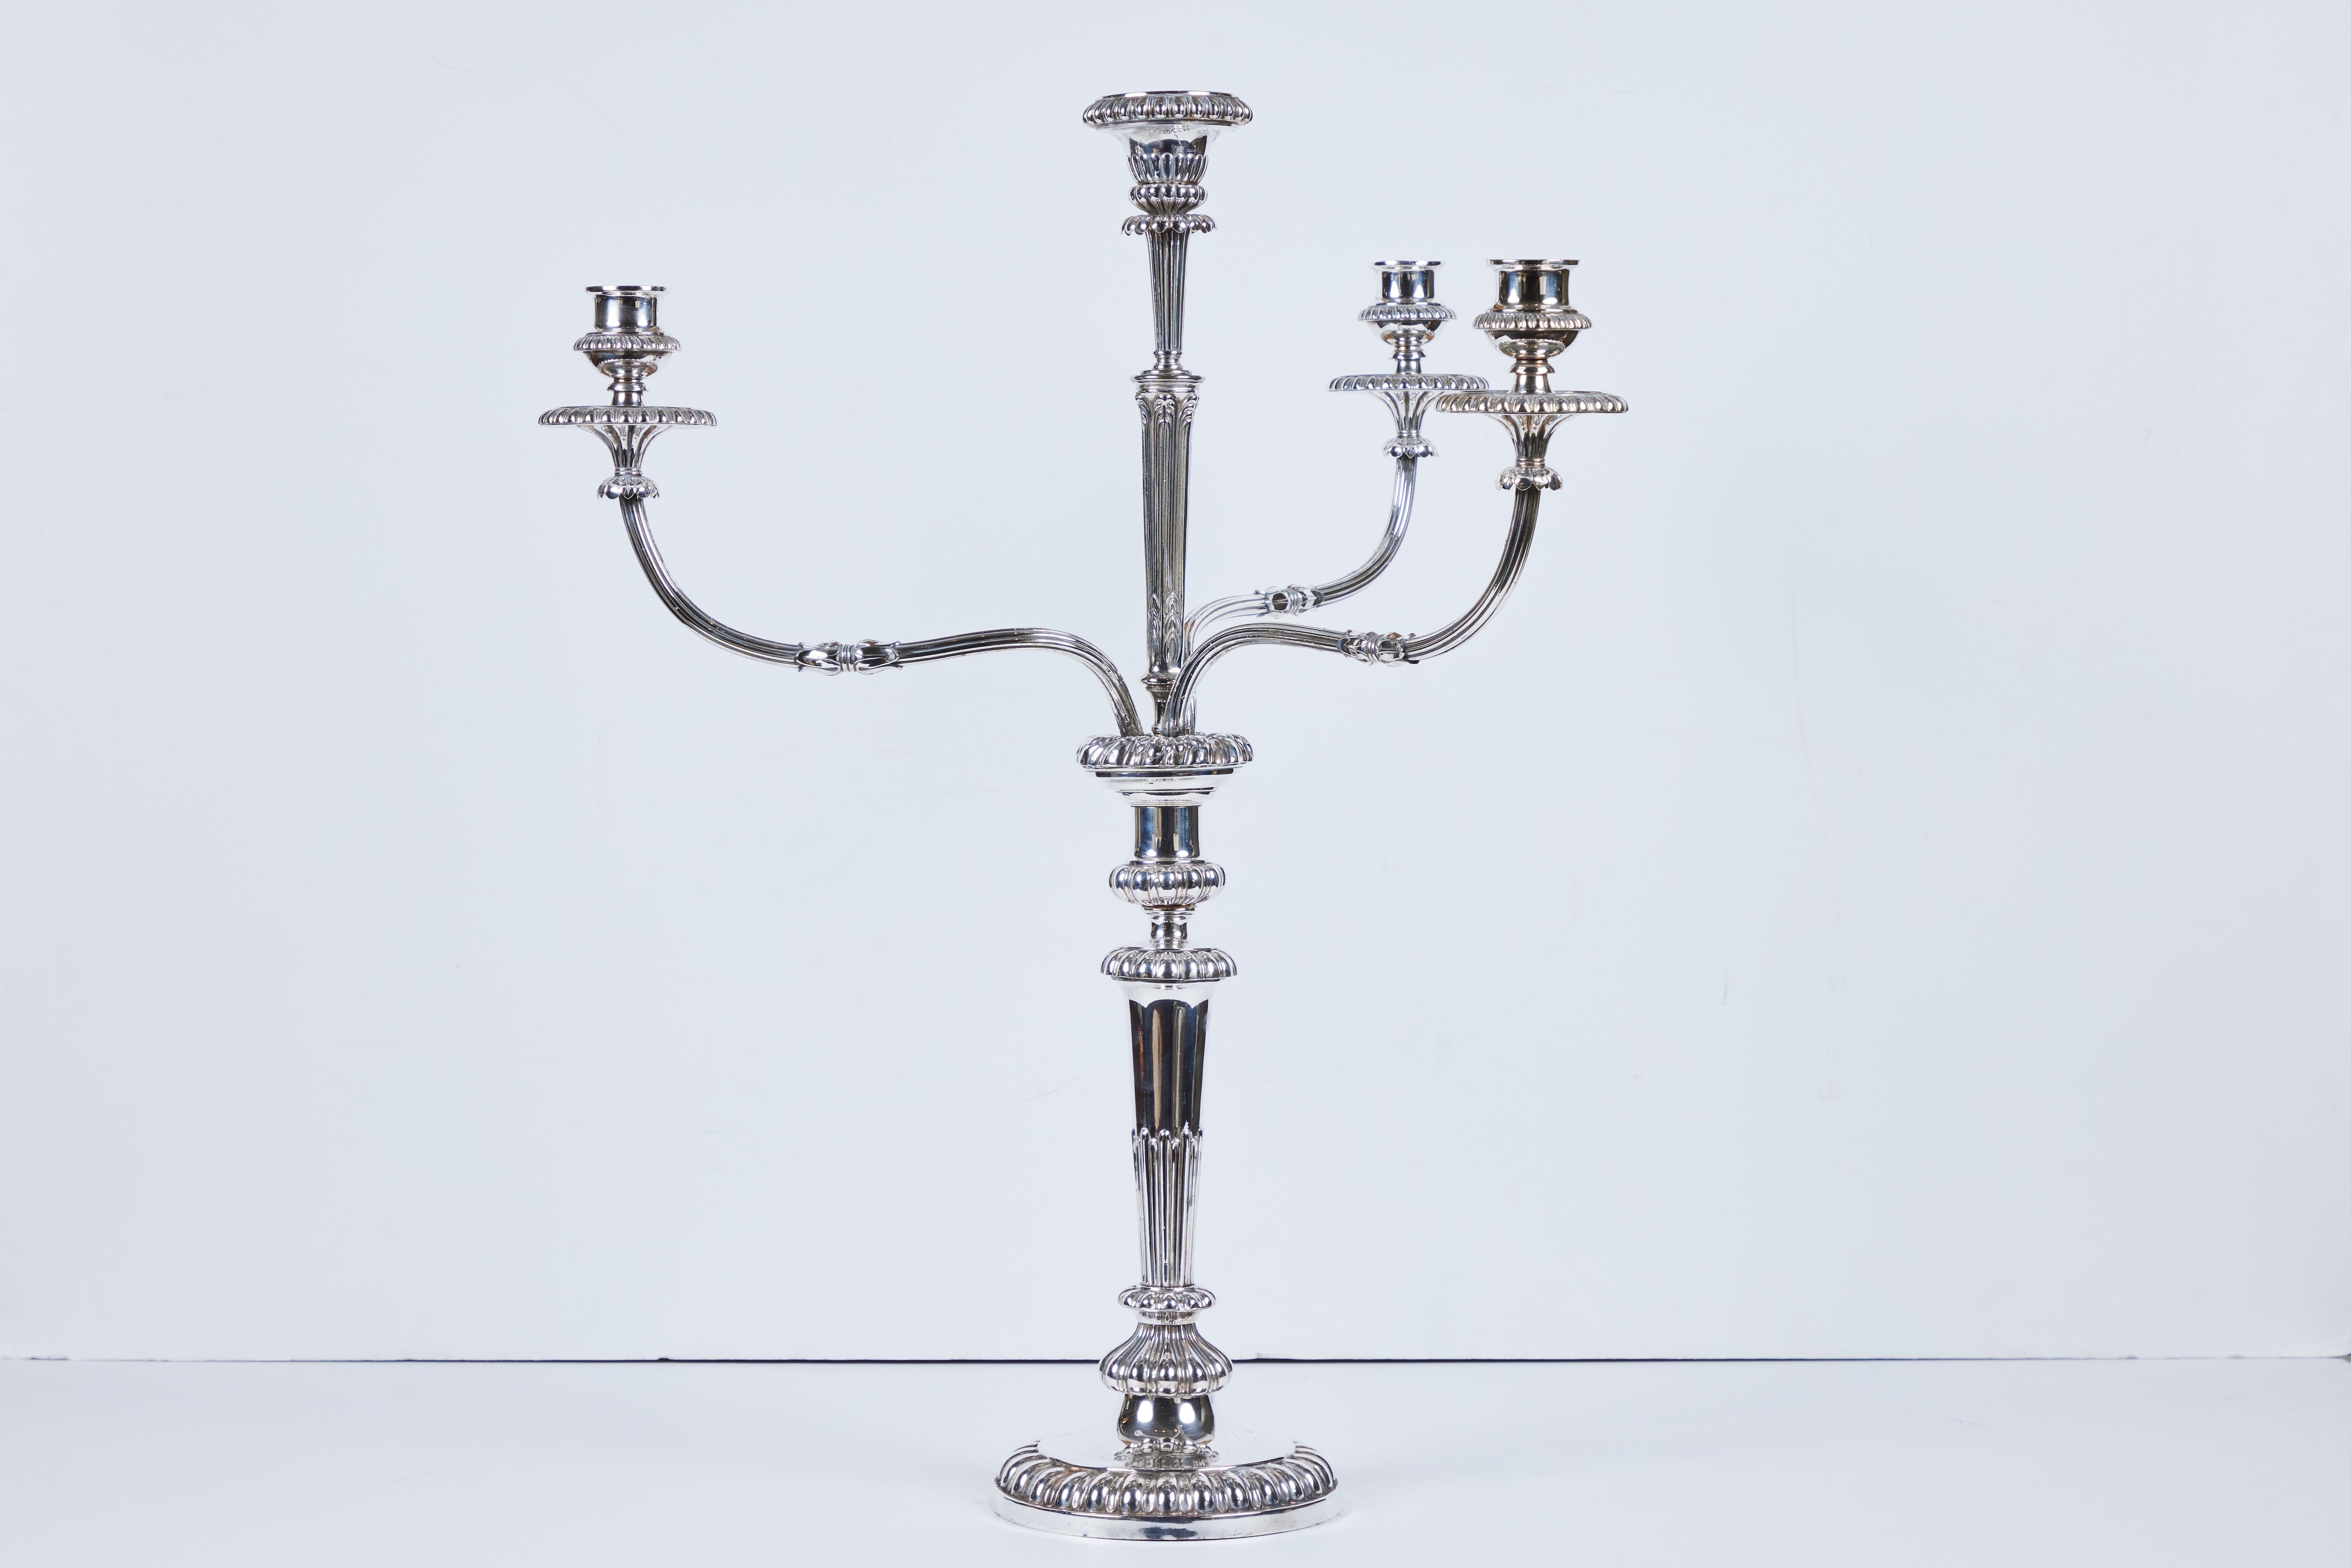 A large, elegant pair of silver plated Sheffield 3 arm candelabra with beautiful movement.